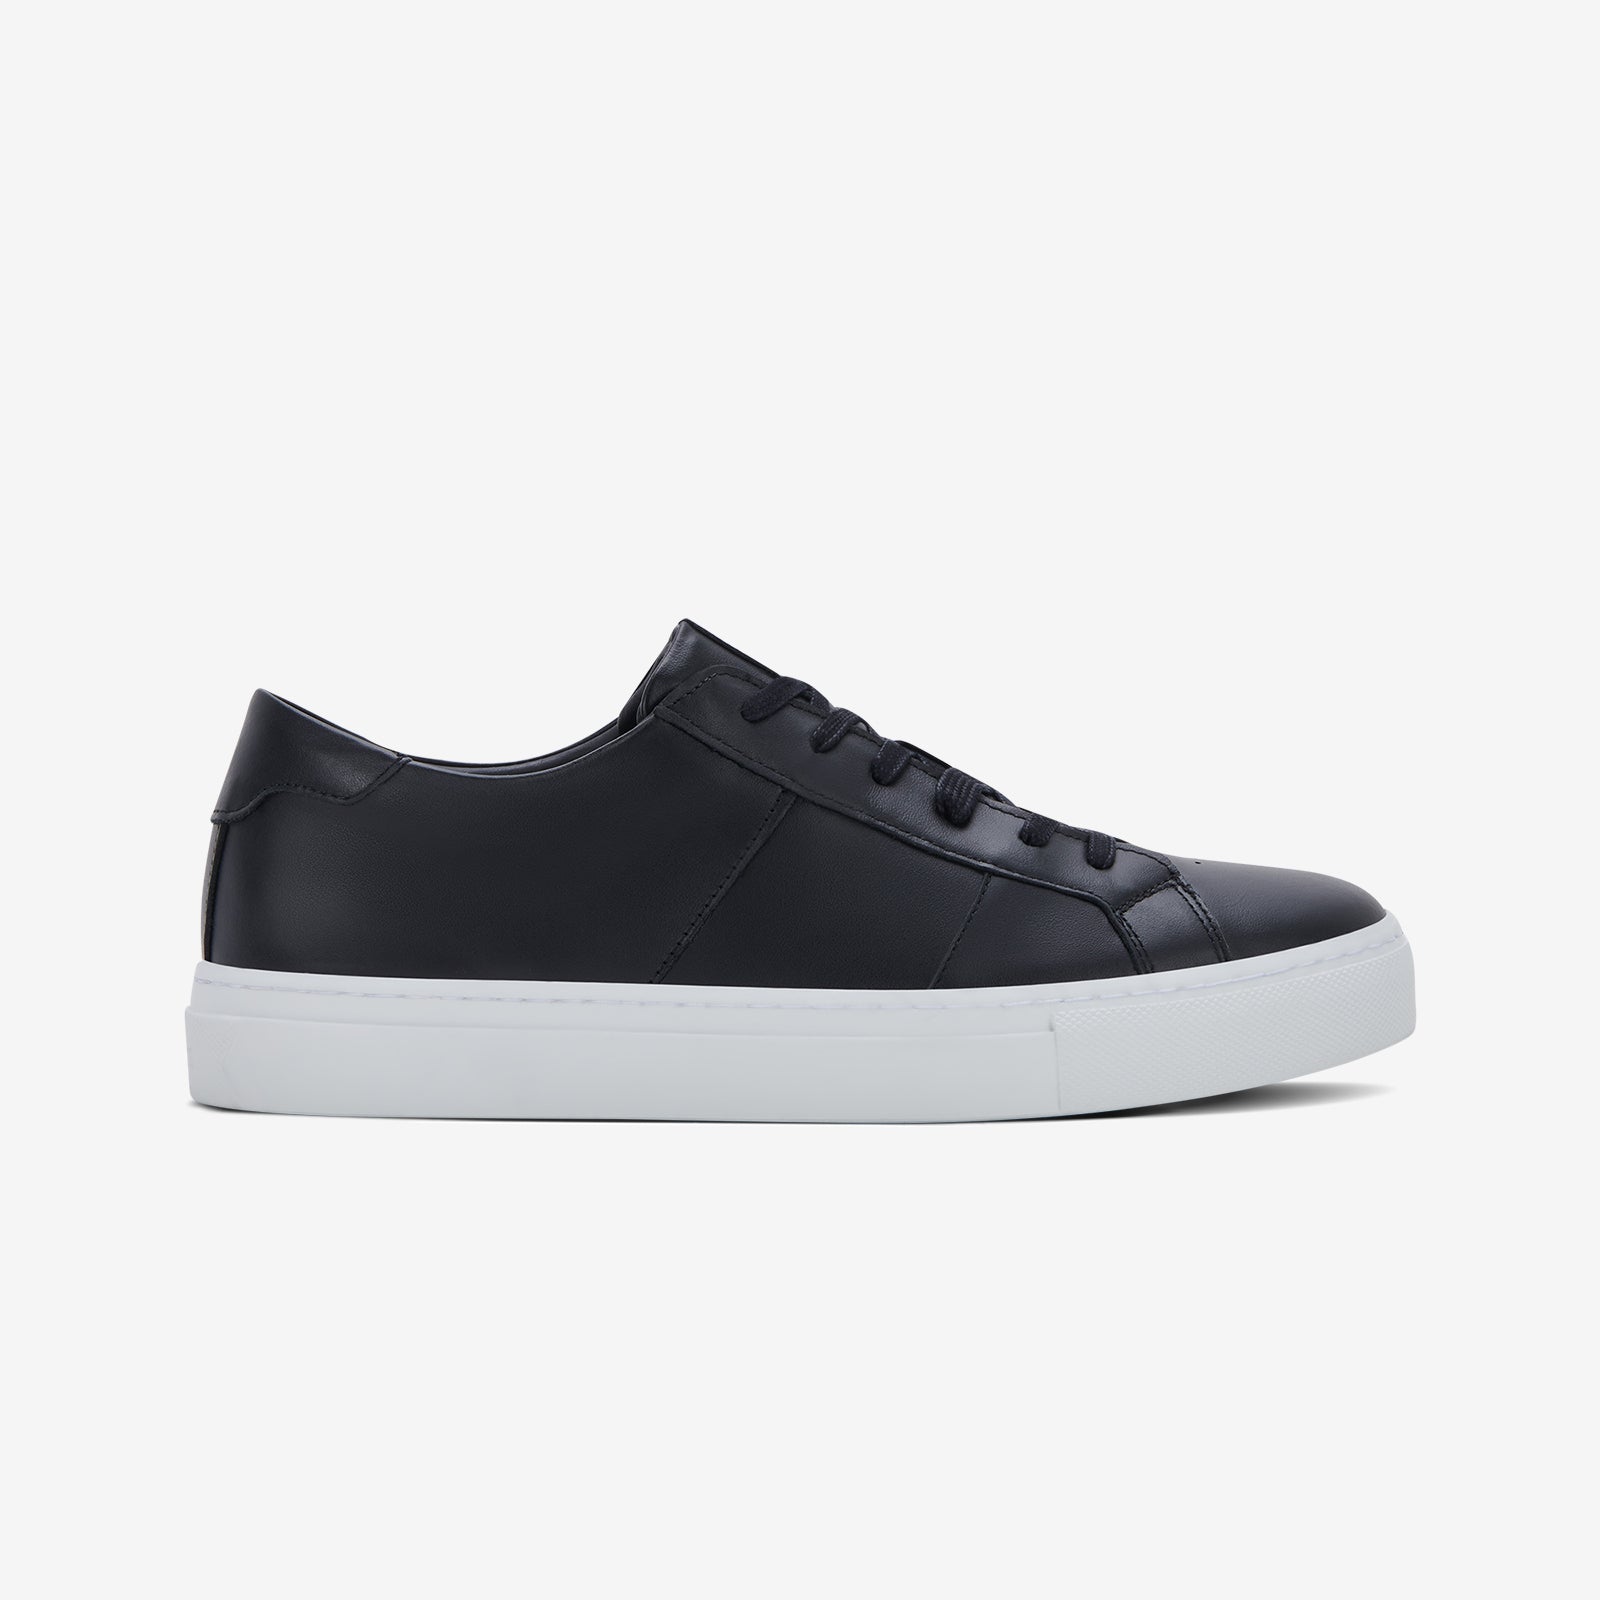 LV Trainer  Swag shoes, Best sneakers, All black sneakers